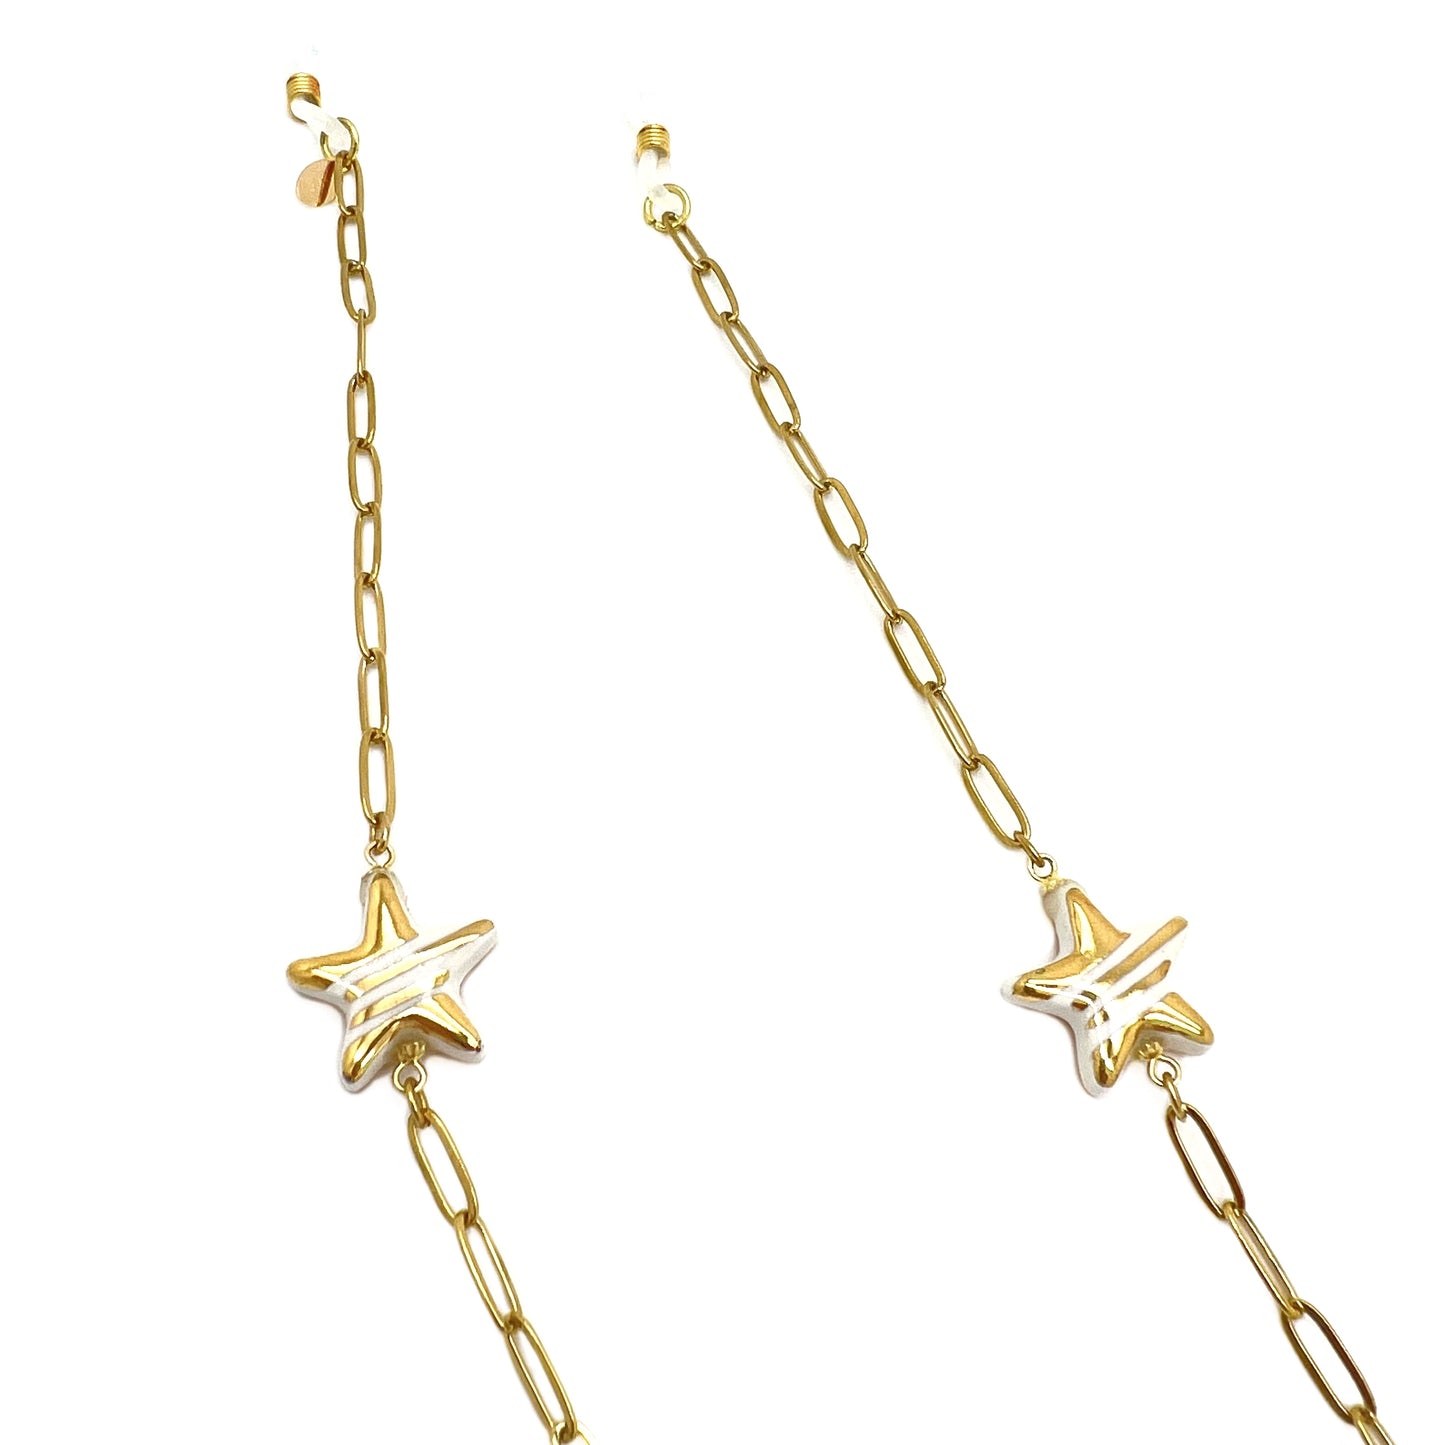 Glasses chain with gold stars